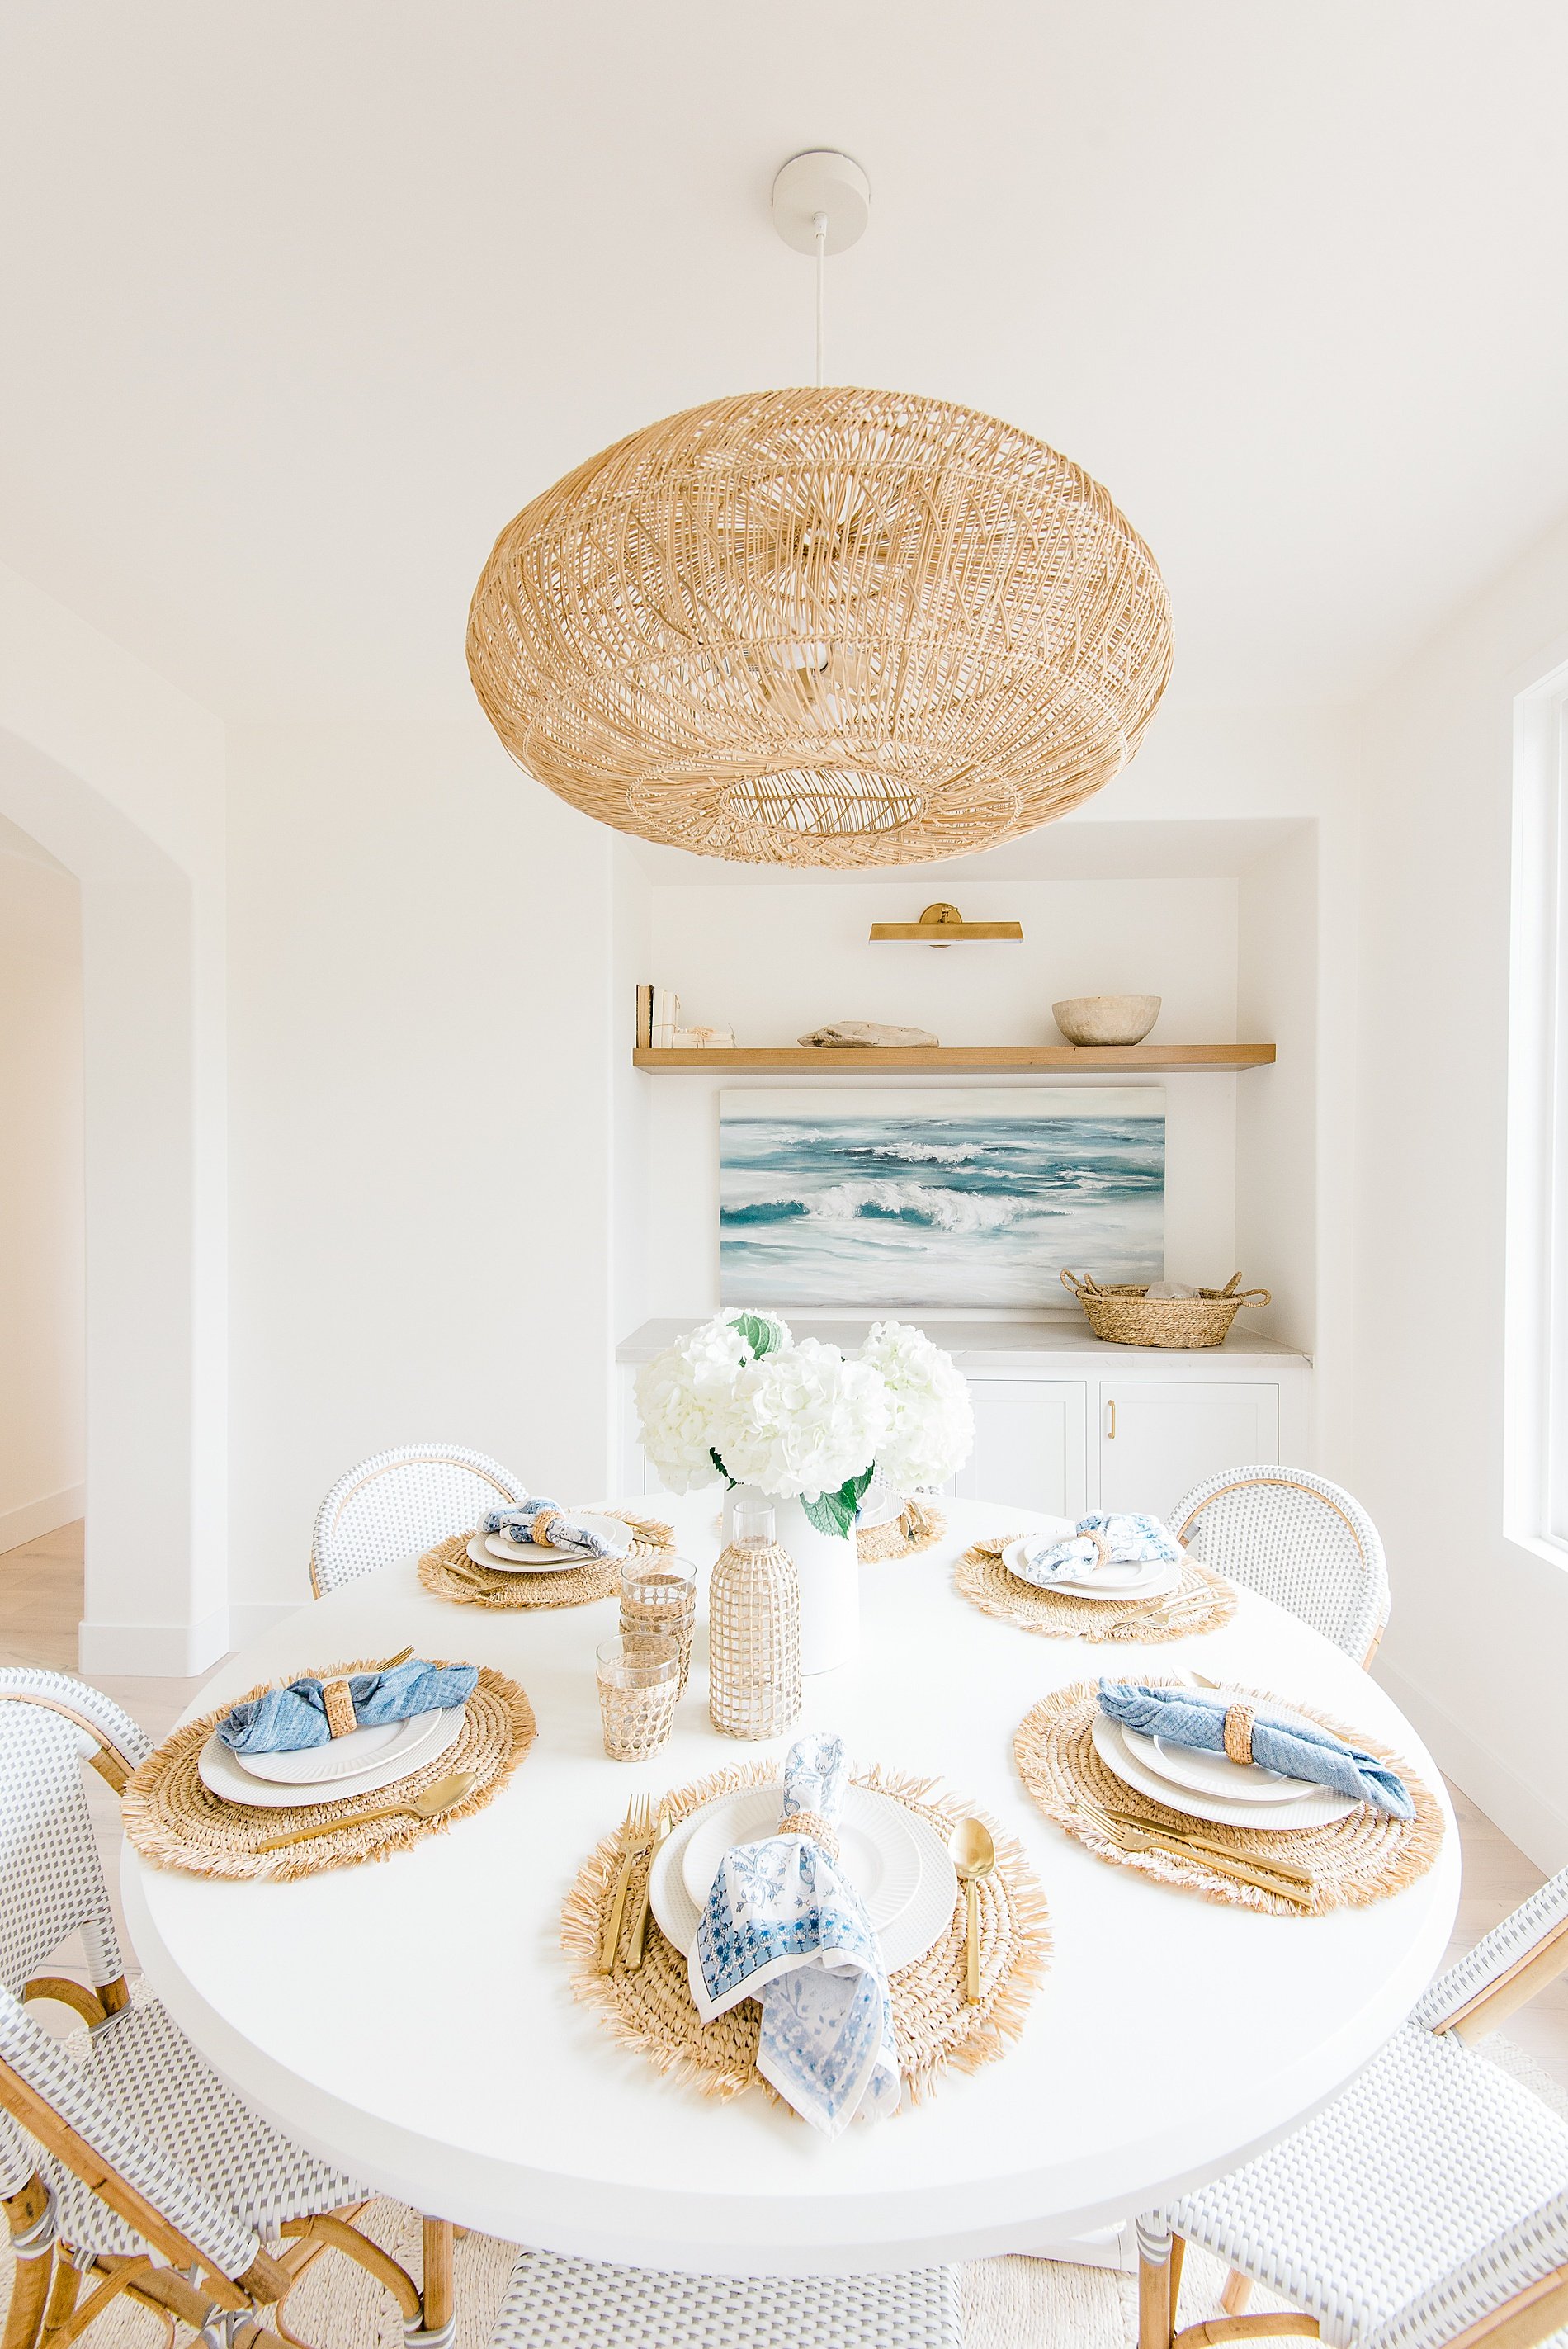  Light and airy dining room renovation by Keri Michelle Interiors 